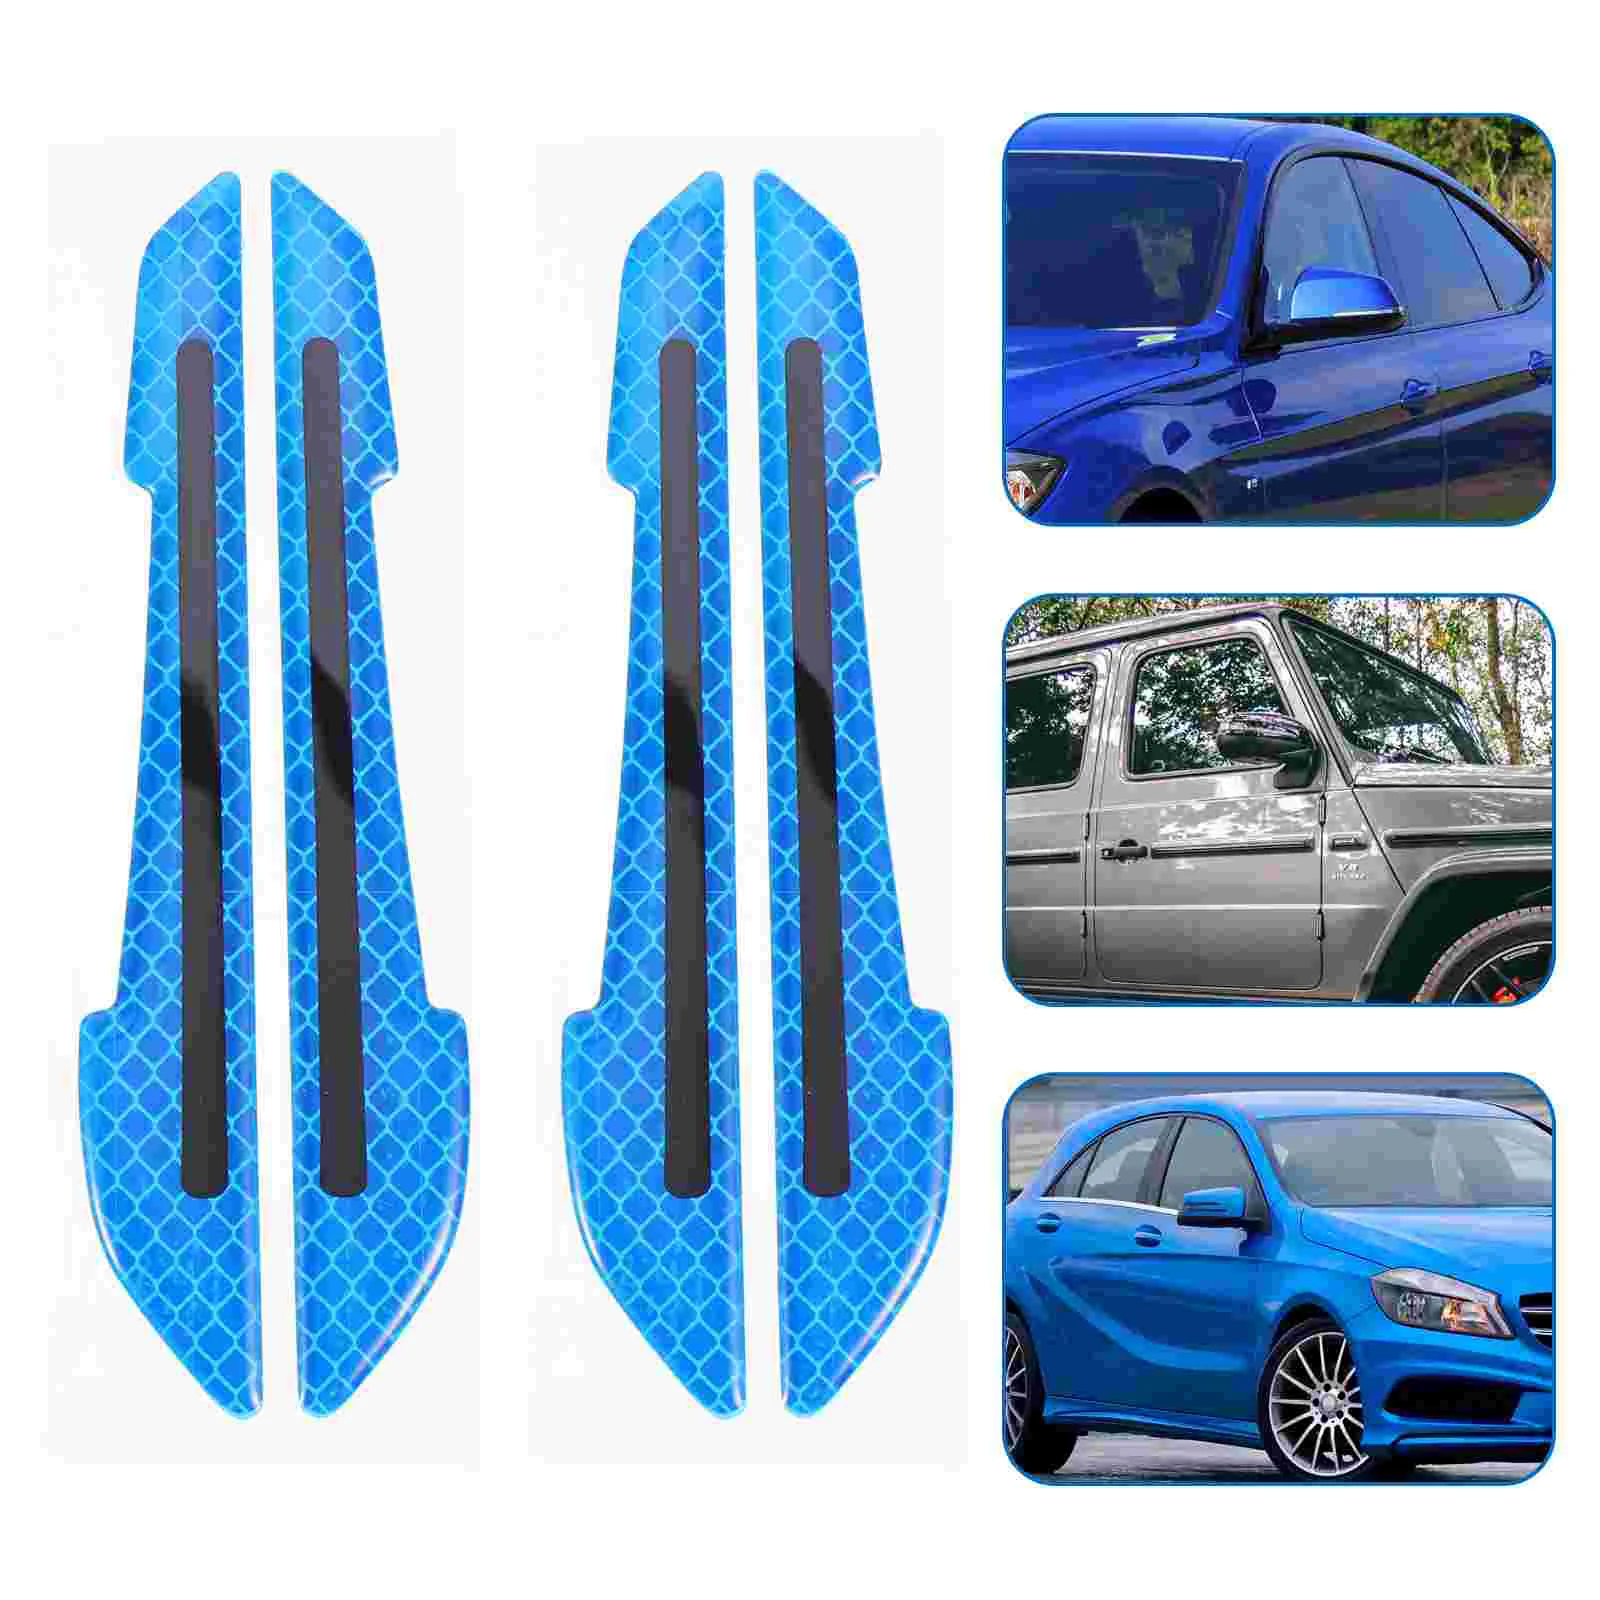 

Car Stickers Anti Sticker Reflective Safety Collision Warning Guards Rearview Strips Door Trim Rim Protection Scratch Tape Wheel